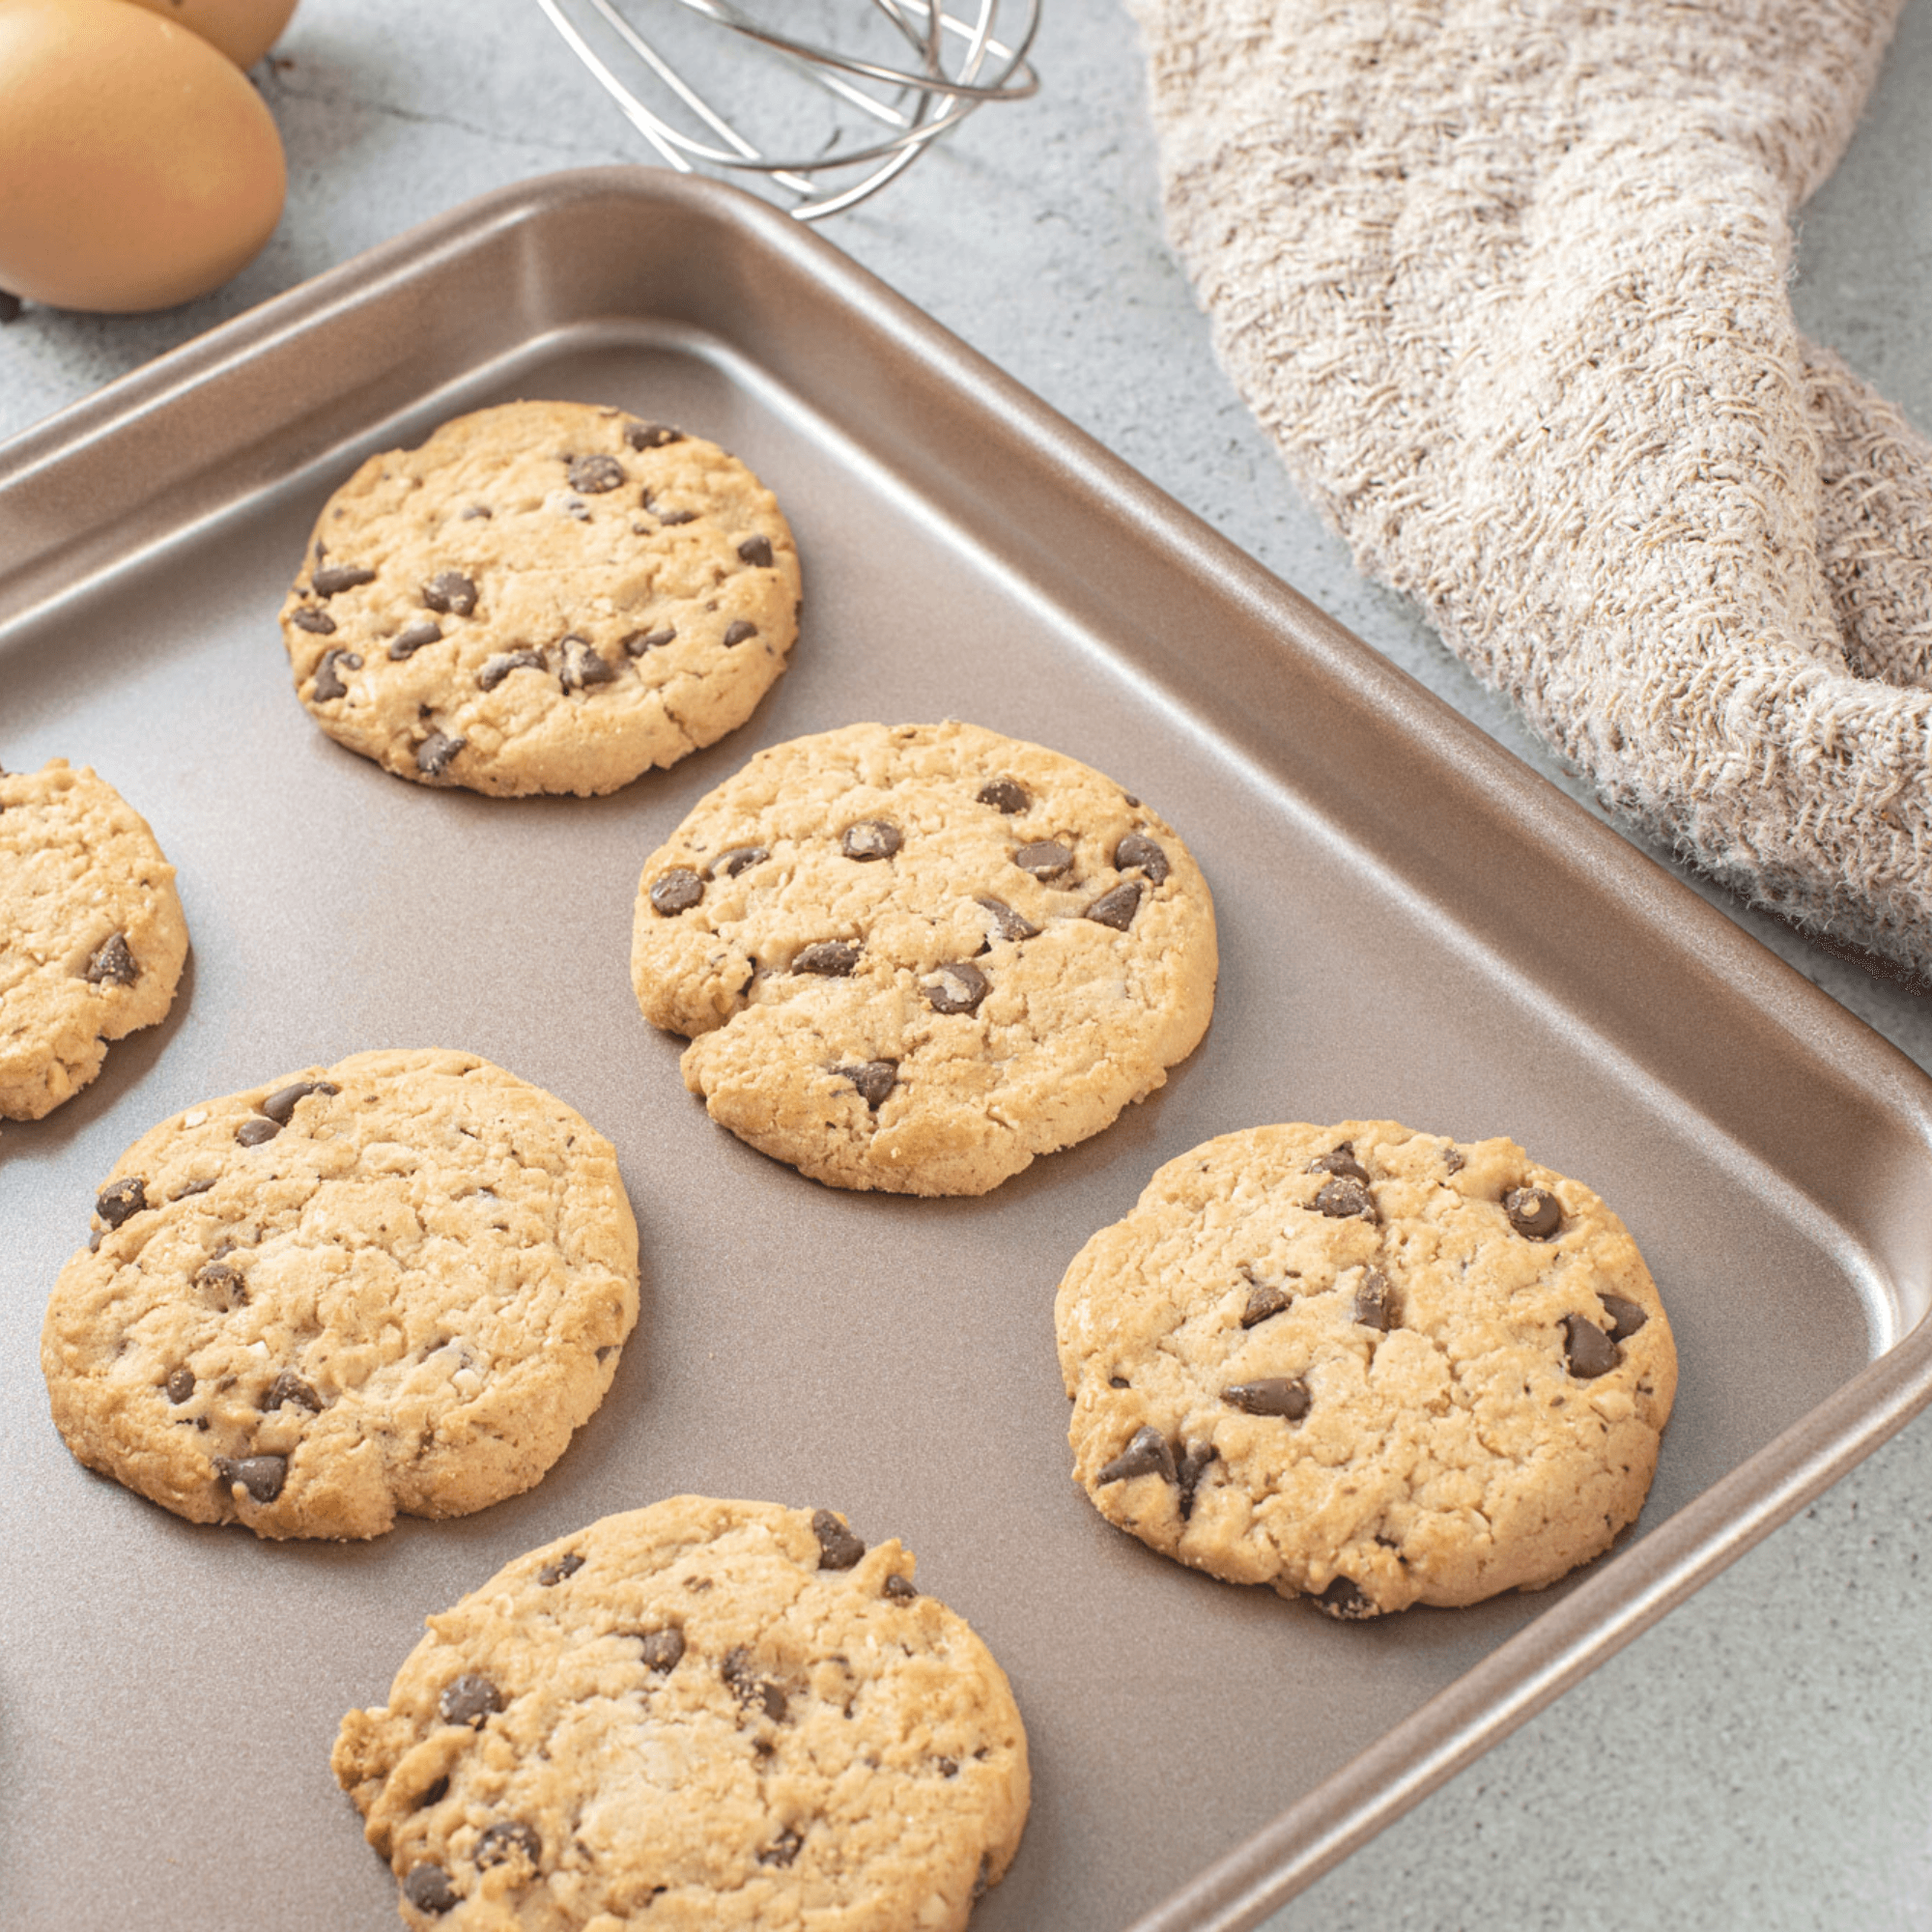 Cookie Baking Sheets